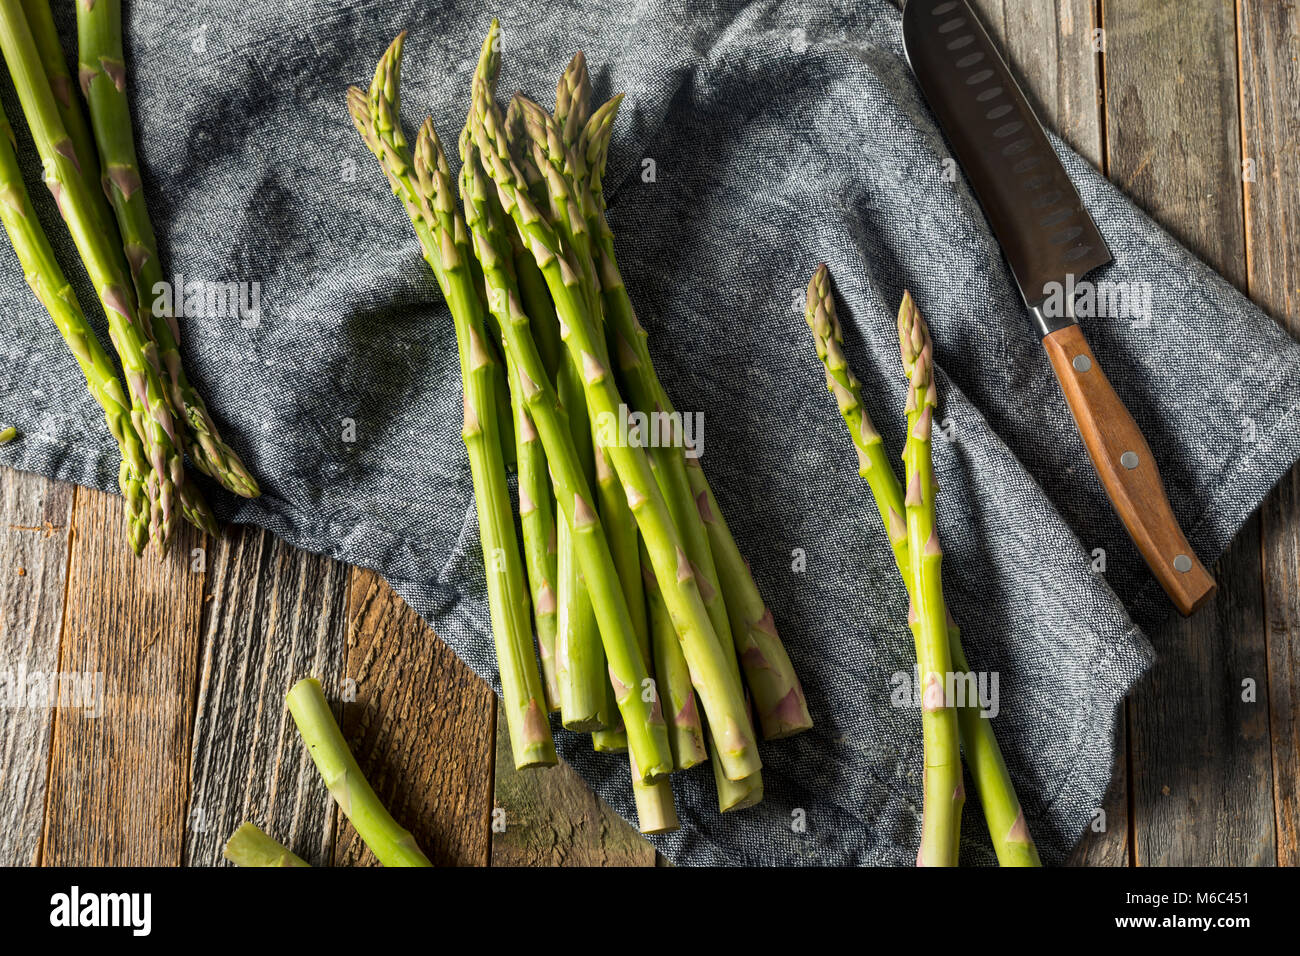 Healthy Organic Green Asparagus Stalks Ready to Cook Stock Photo